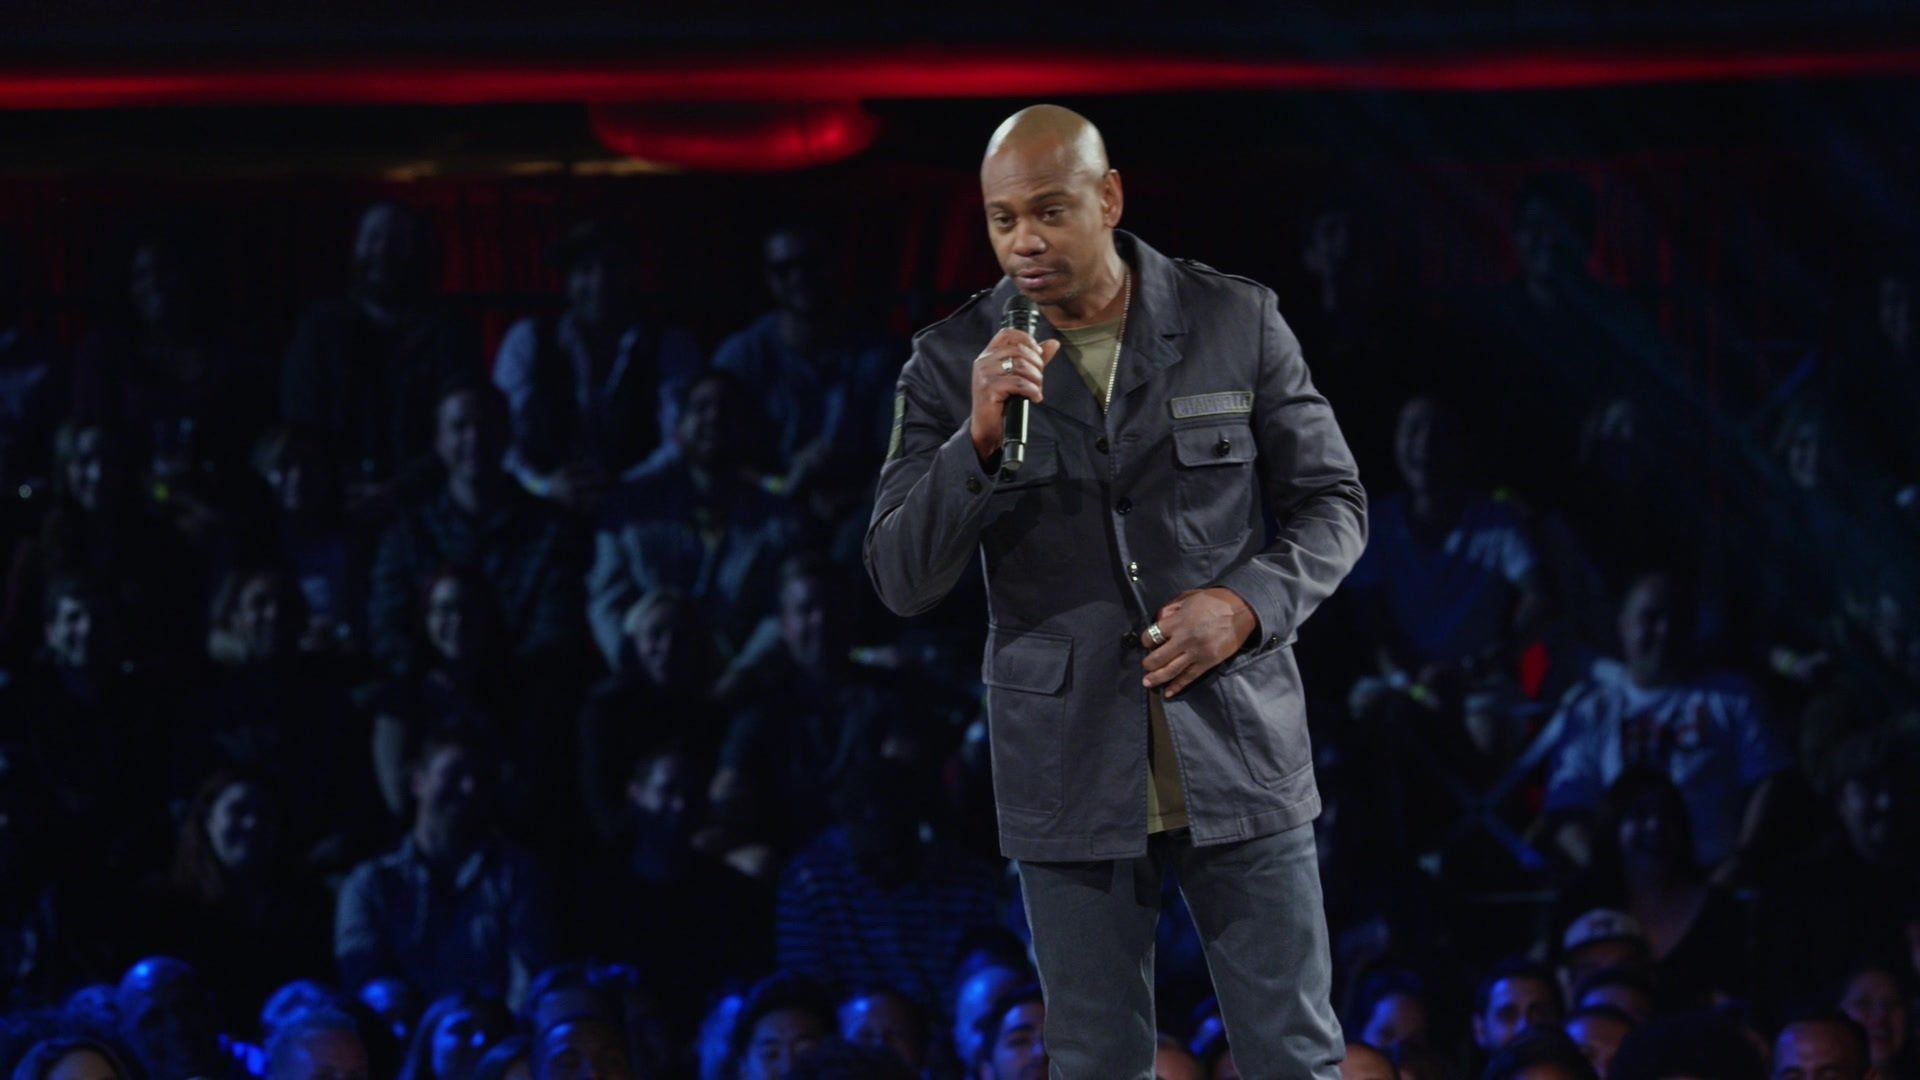 Dave Chappelle: The Age of Spin Backdrop